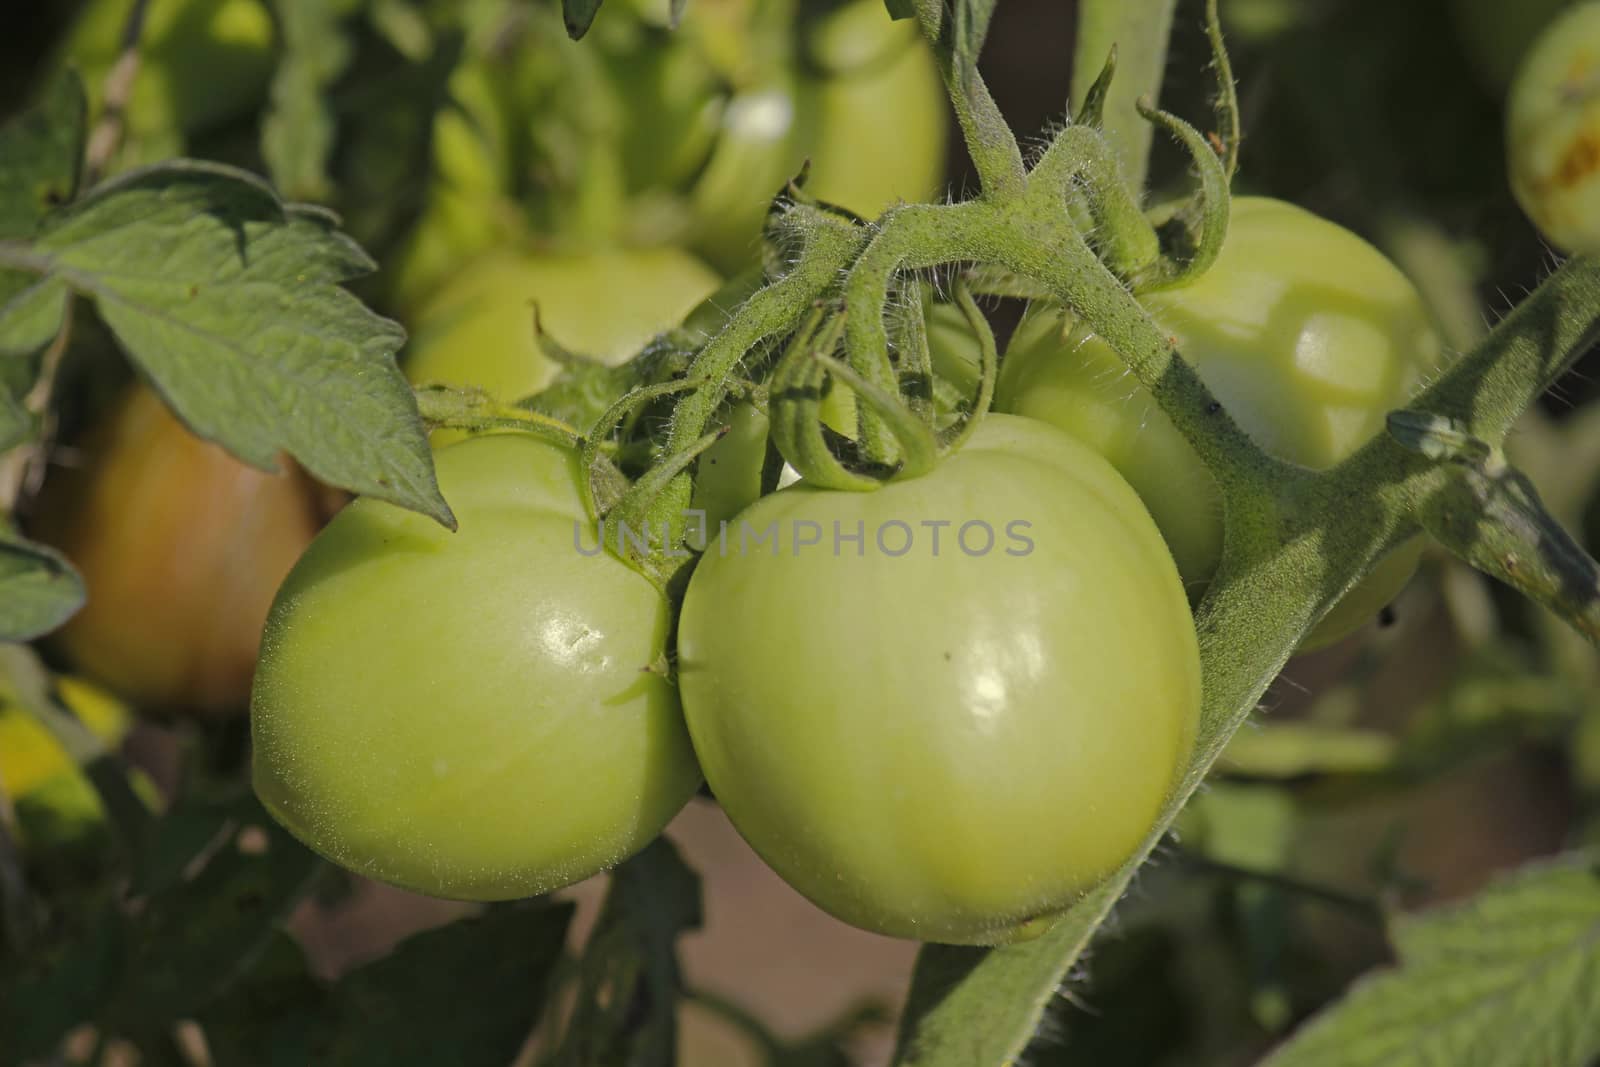 Lycopersicon esculentum, Tomatoes are one of the most common vegetables in India. The red round fruit is eaten raw or cooked. All green parts of the plant are poisonous.